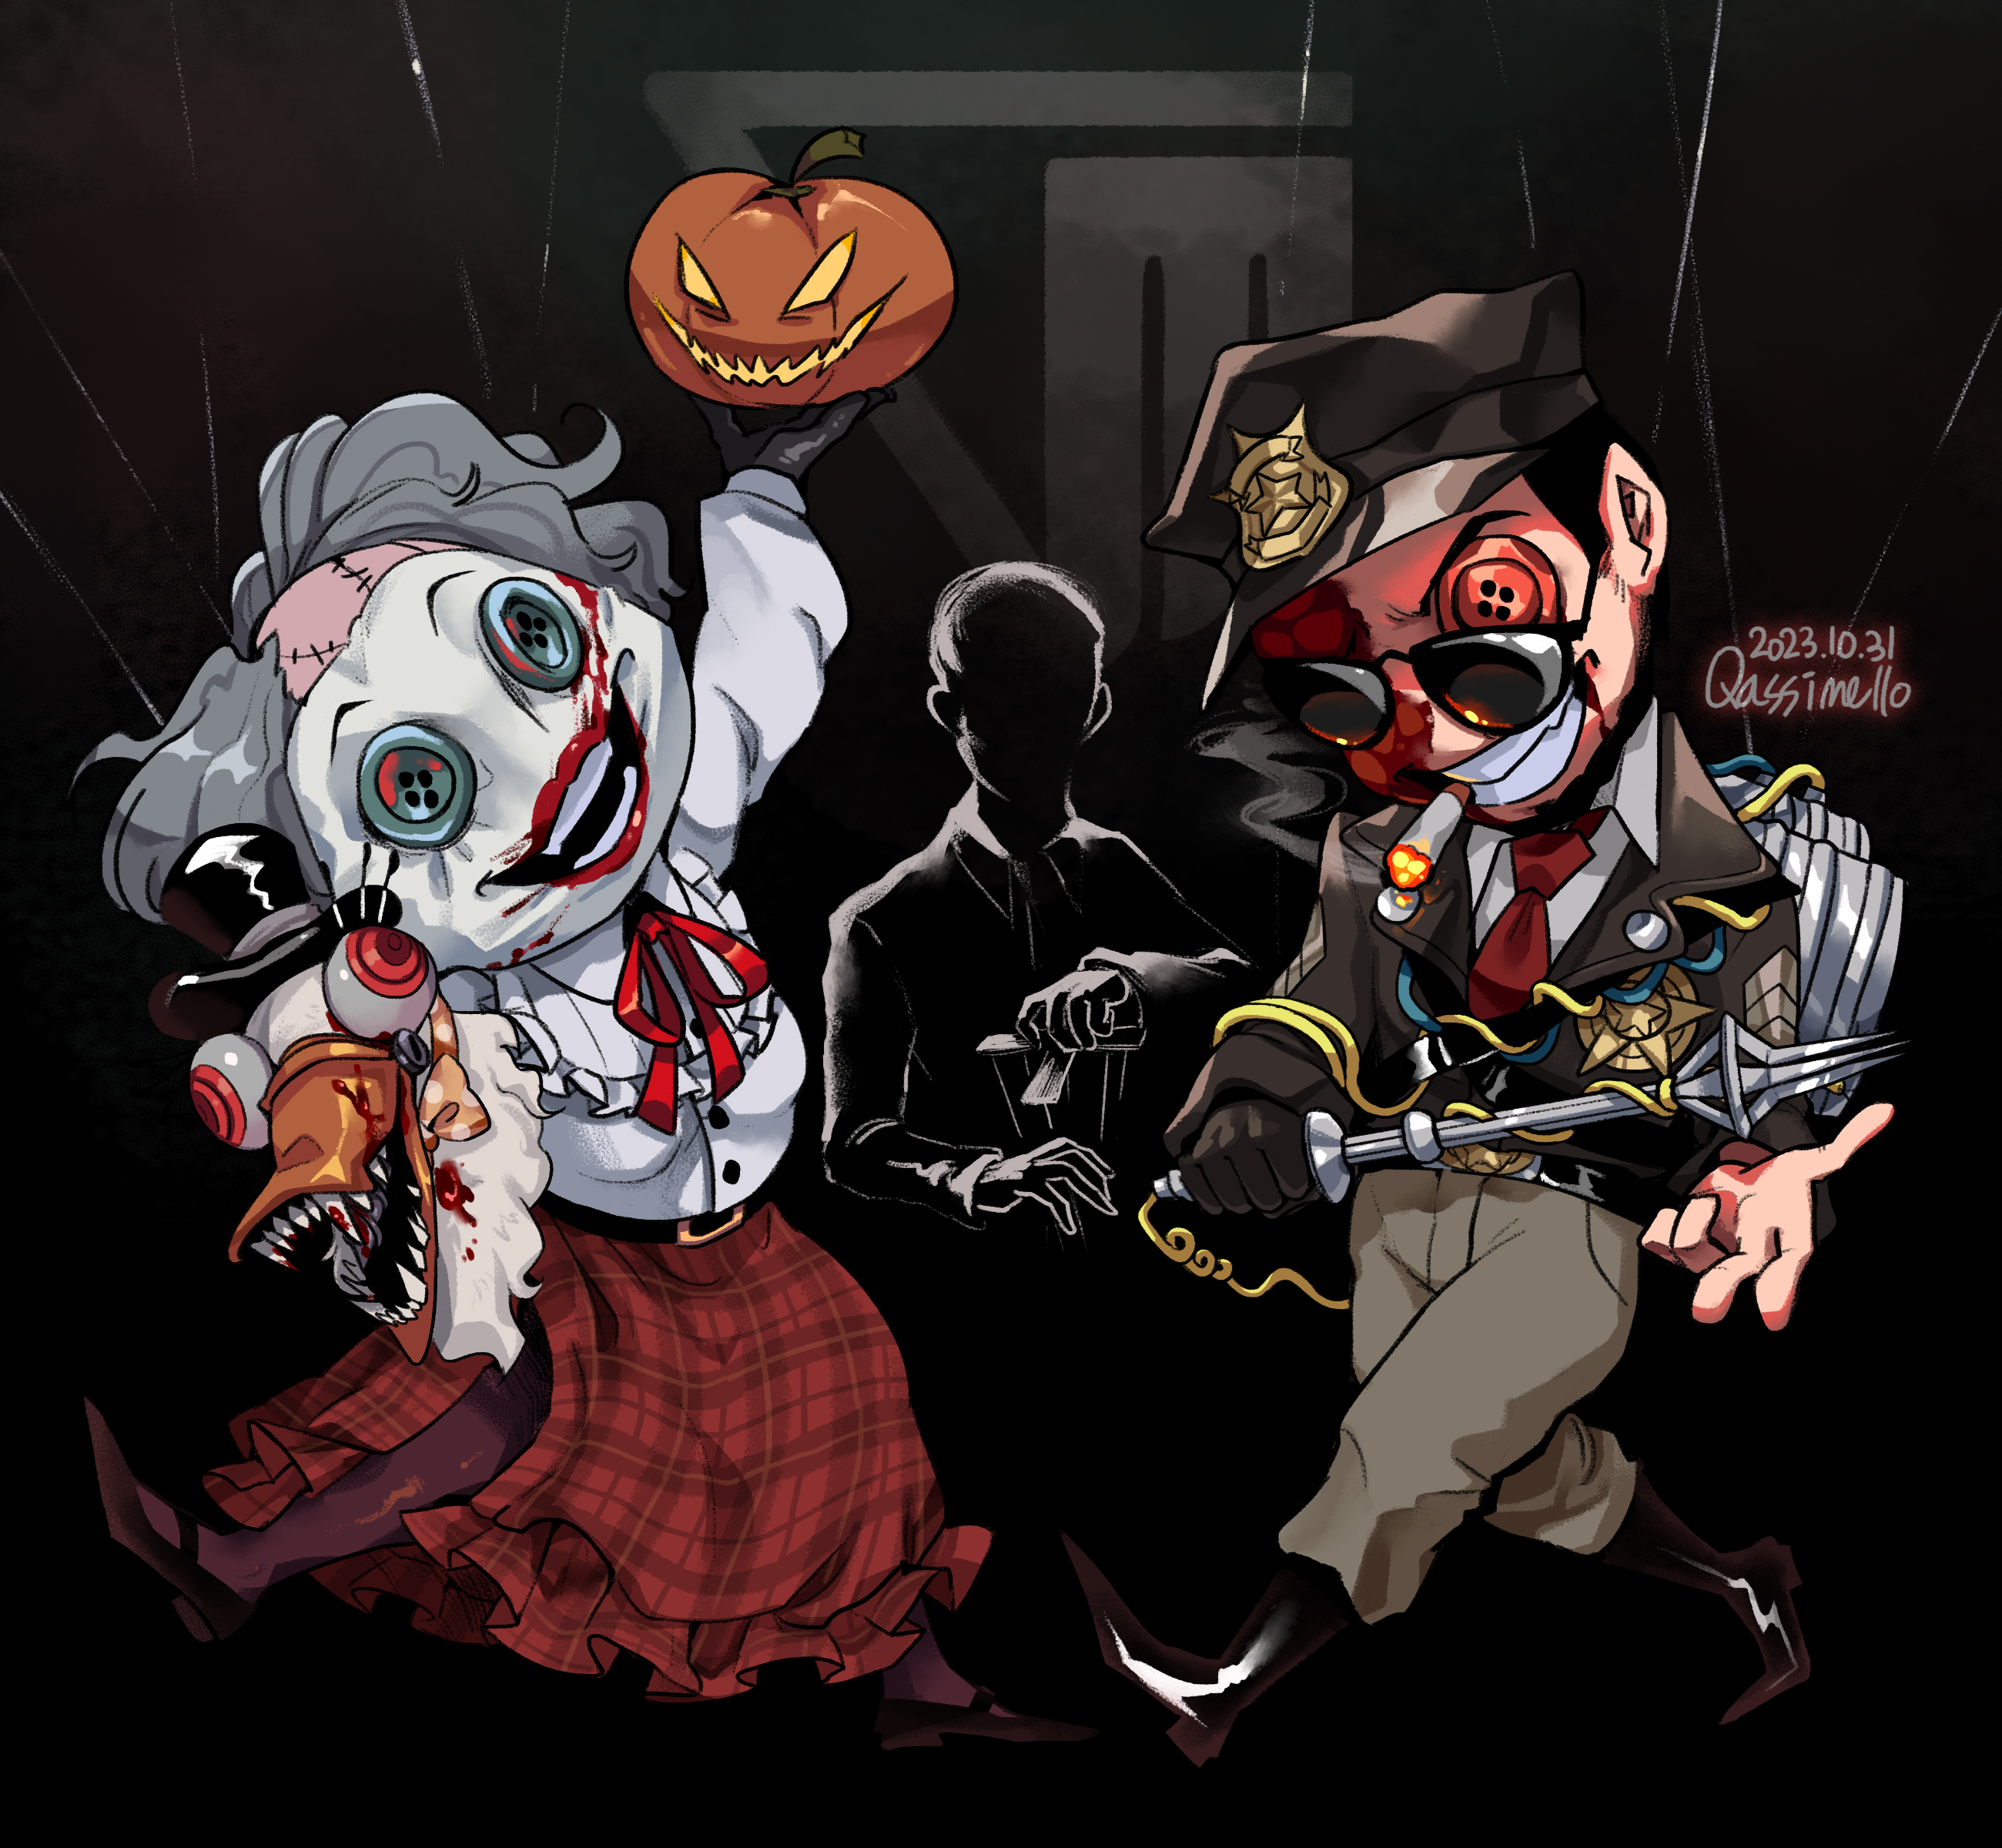 Trick-or-Trial? Red Barrels Unveils Halloween Update For The